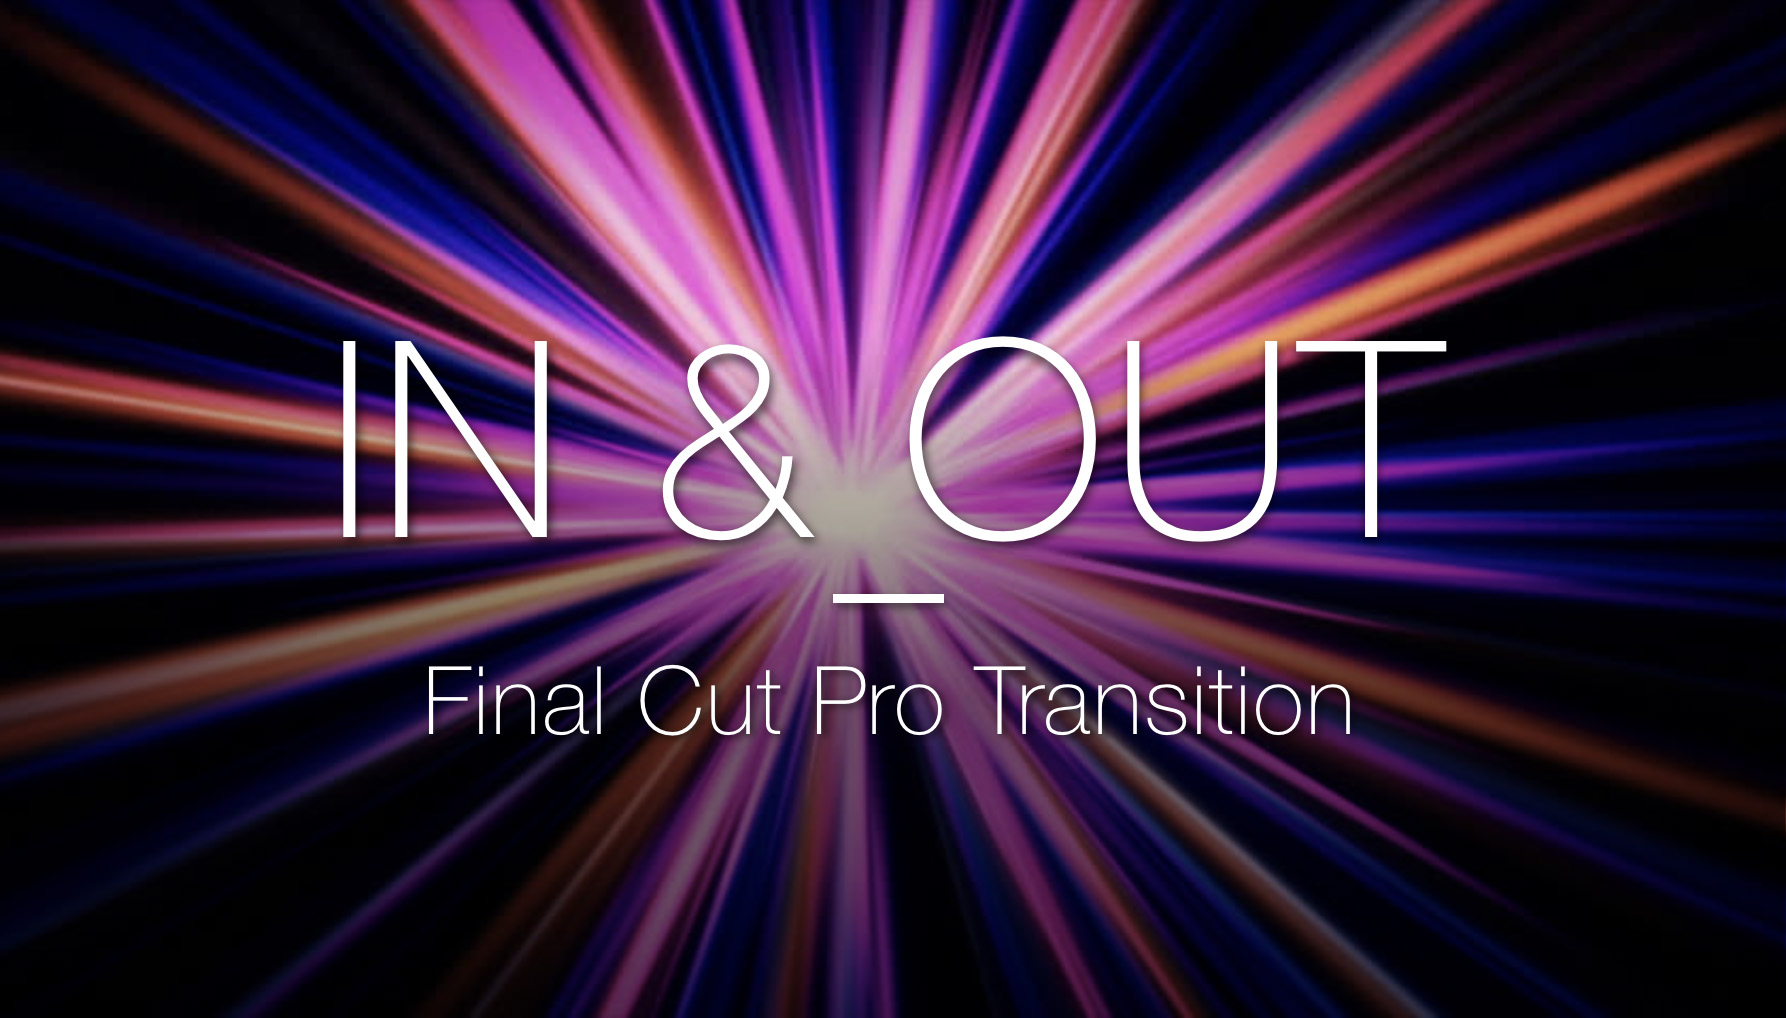 Final Cut Pro Transition - Zoom In & Out